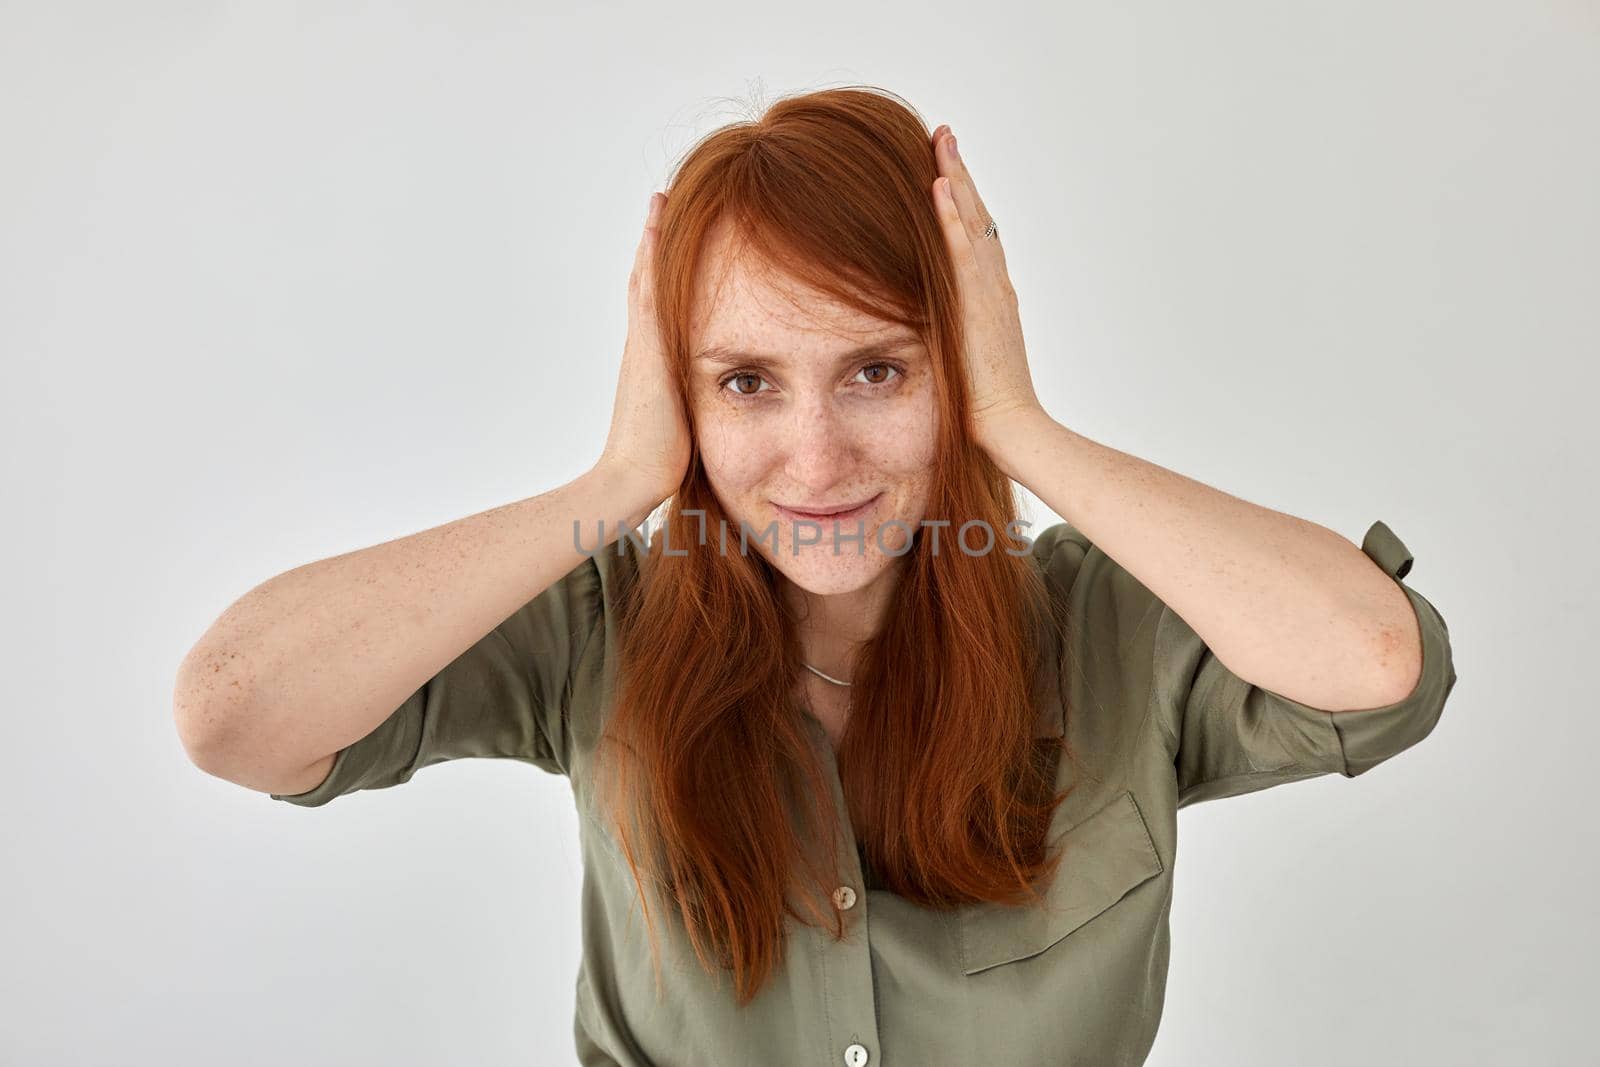 Smiling female with long ginger hair covering ears with hands from noise against white background and looking at camera